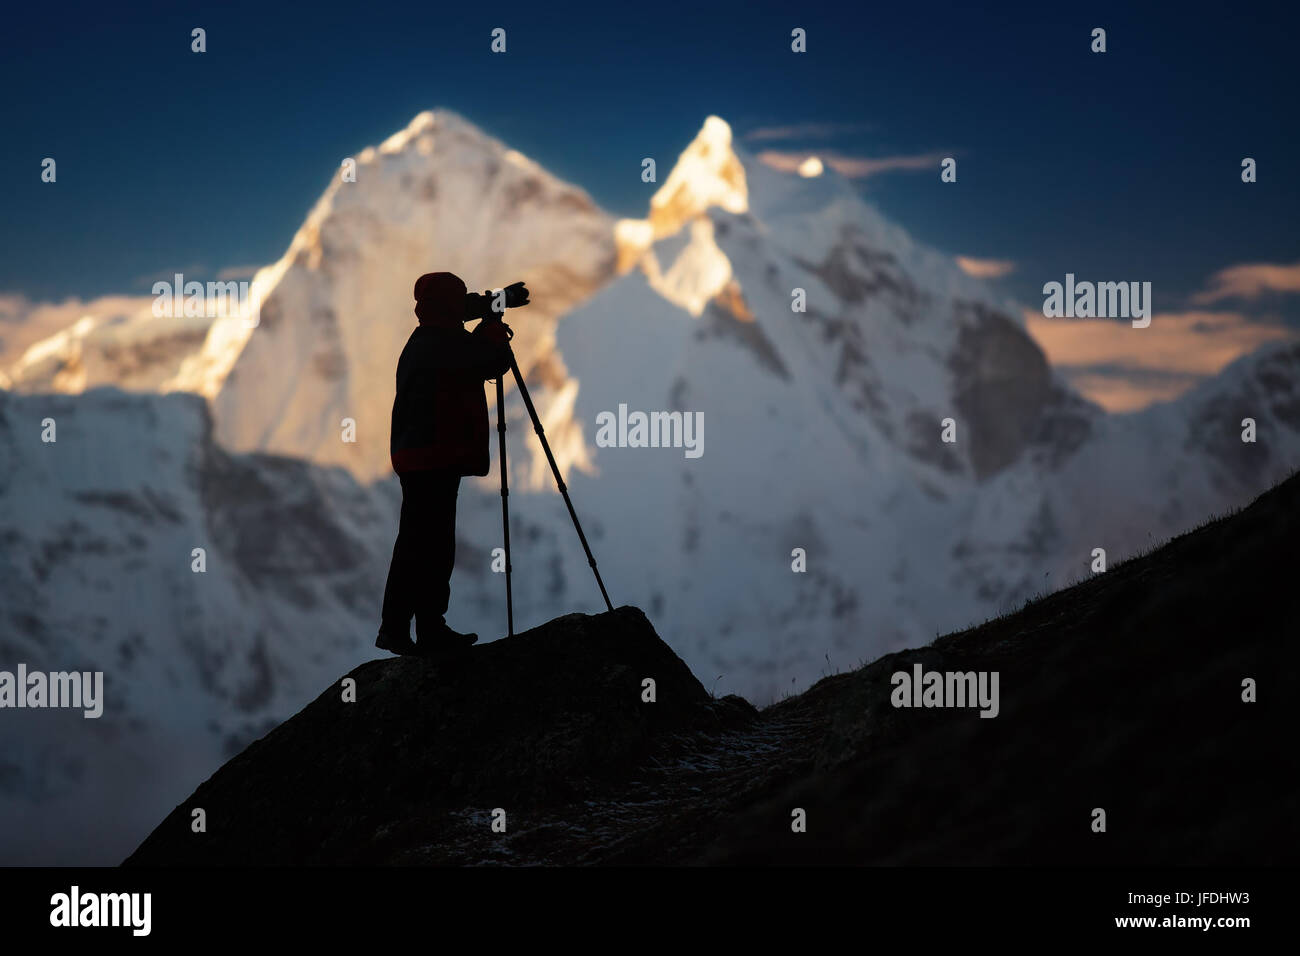 A silhouette of a man (photographer) standing on a hills in front of the mountains. Stock Photo